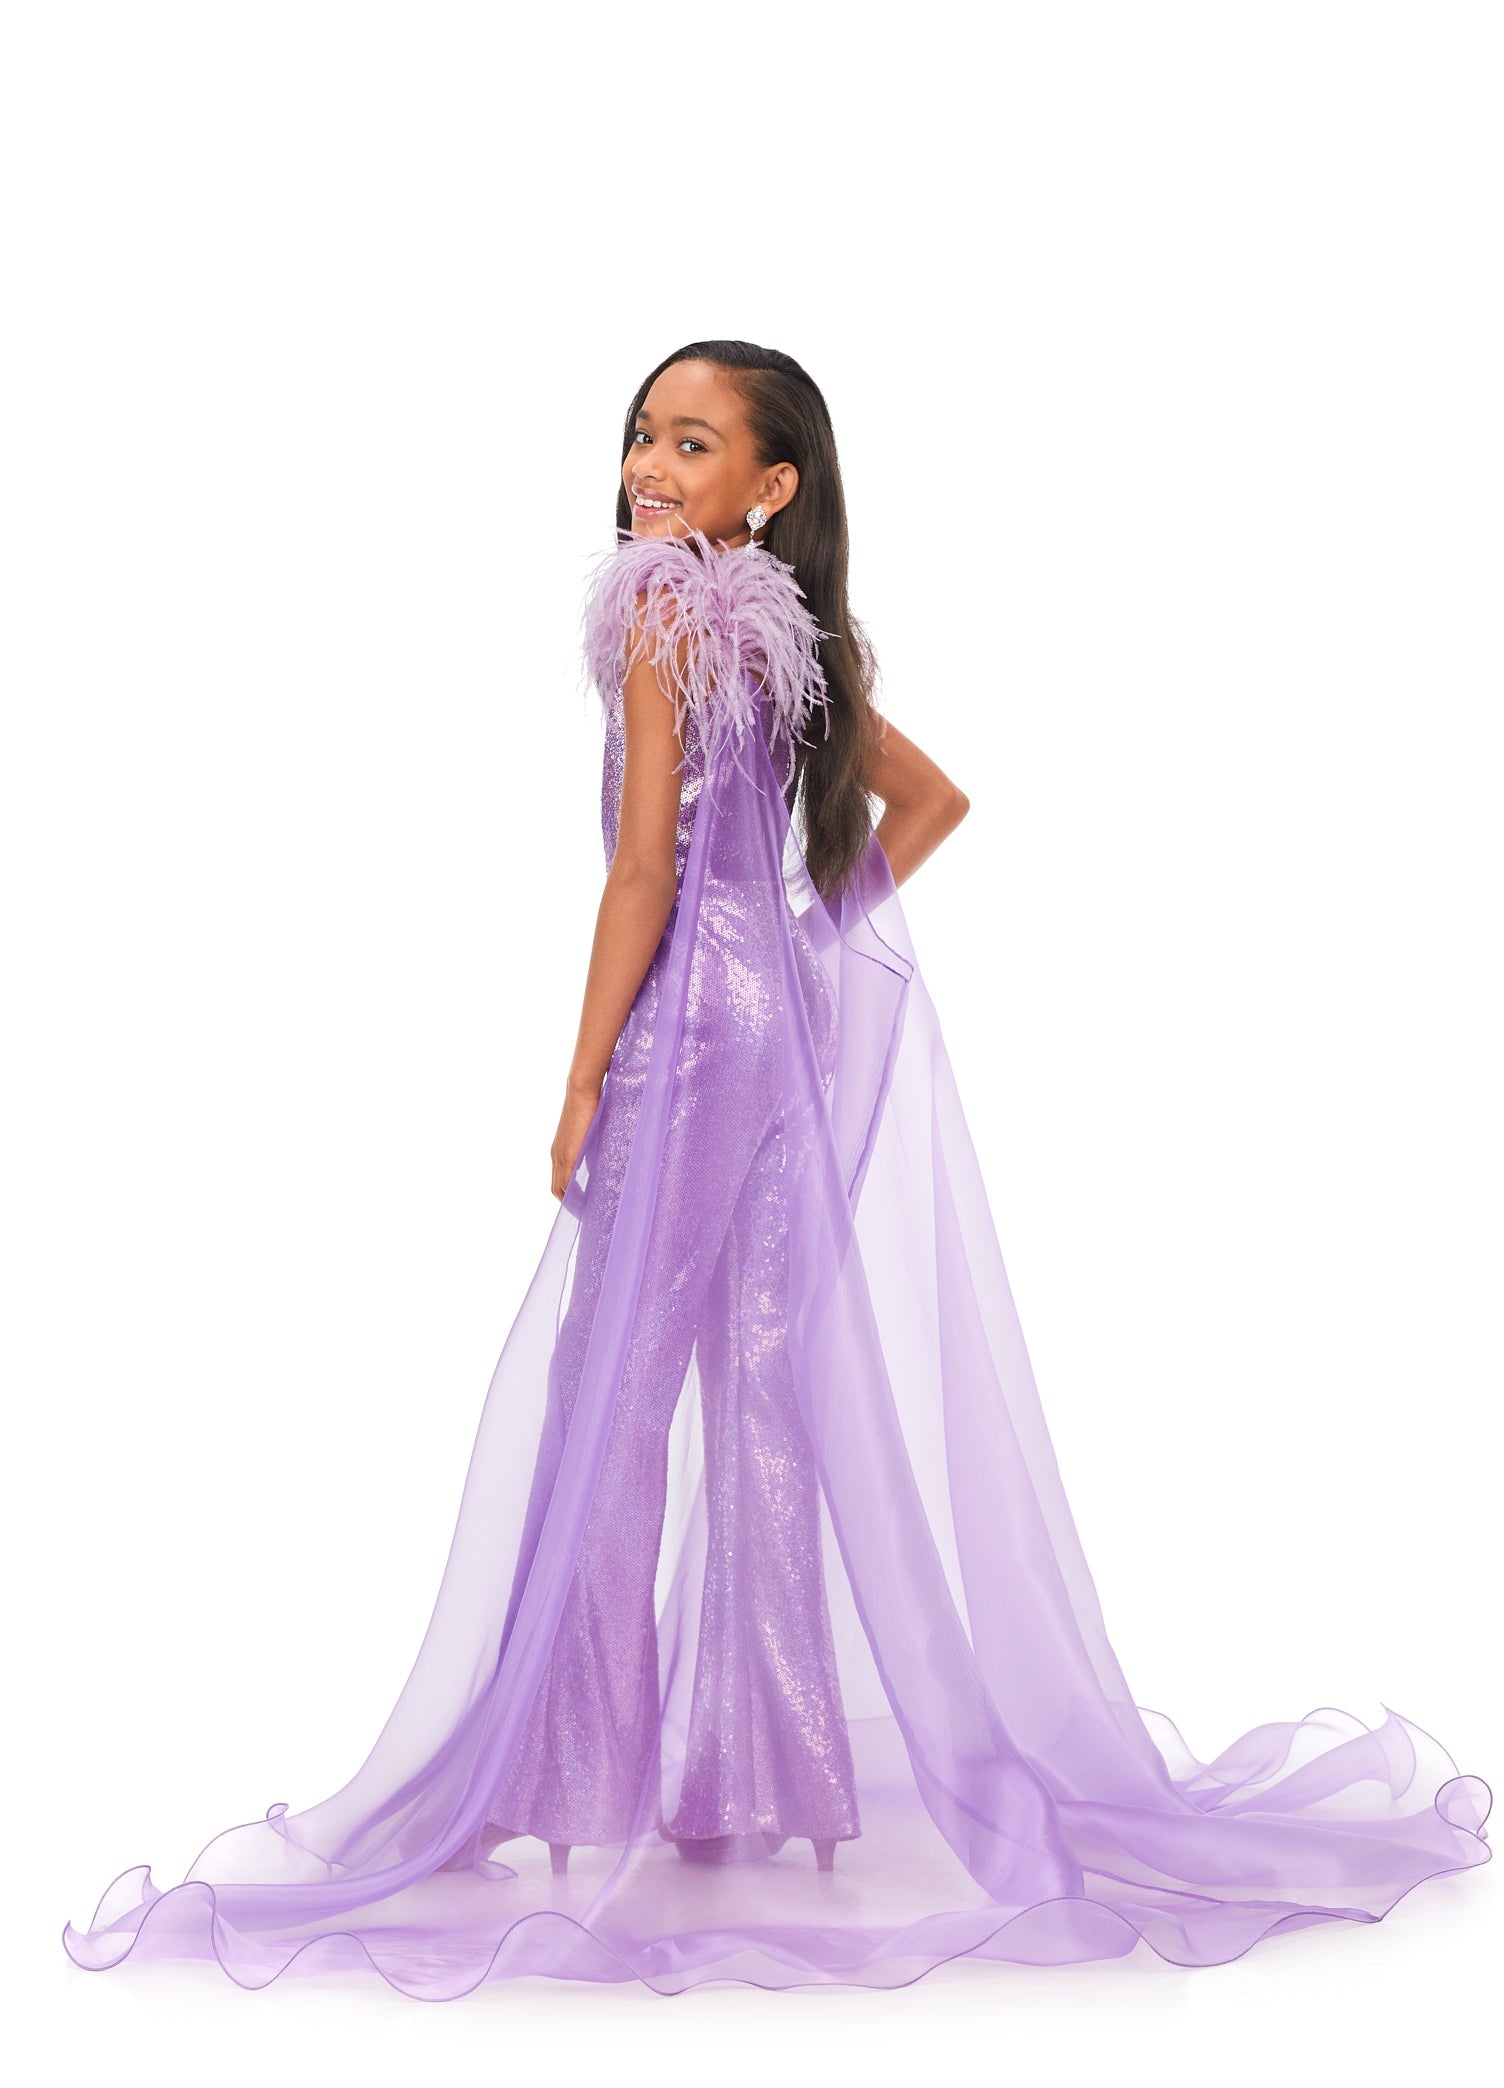 in Stock Ashley Lauren Kids 8174 Size 4,8,10,12,14 Orchid Girls Sequin Jumpsuit Cape Pageant Fun Fashion 14 / Orchid